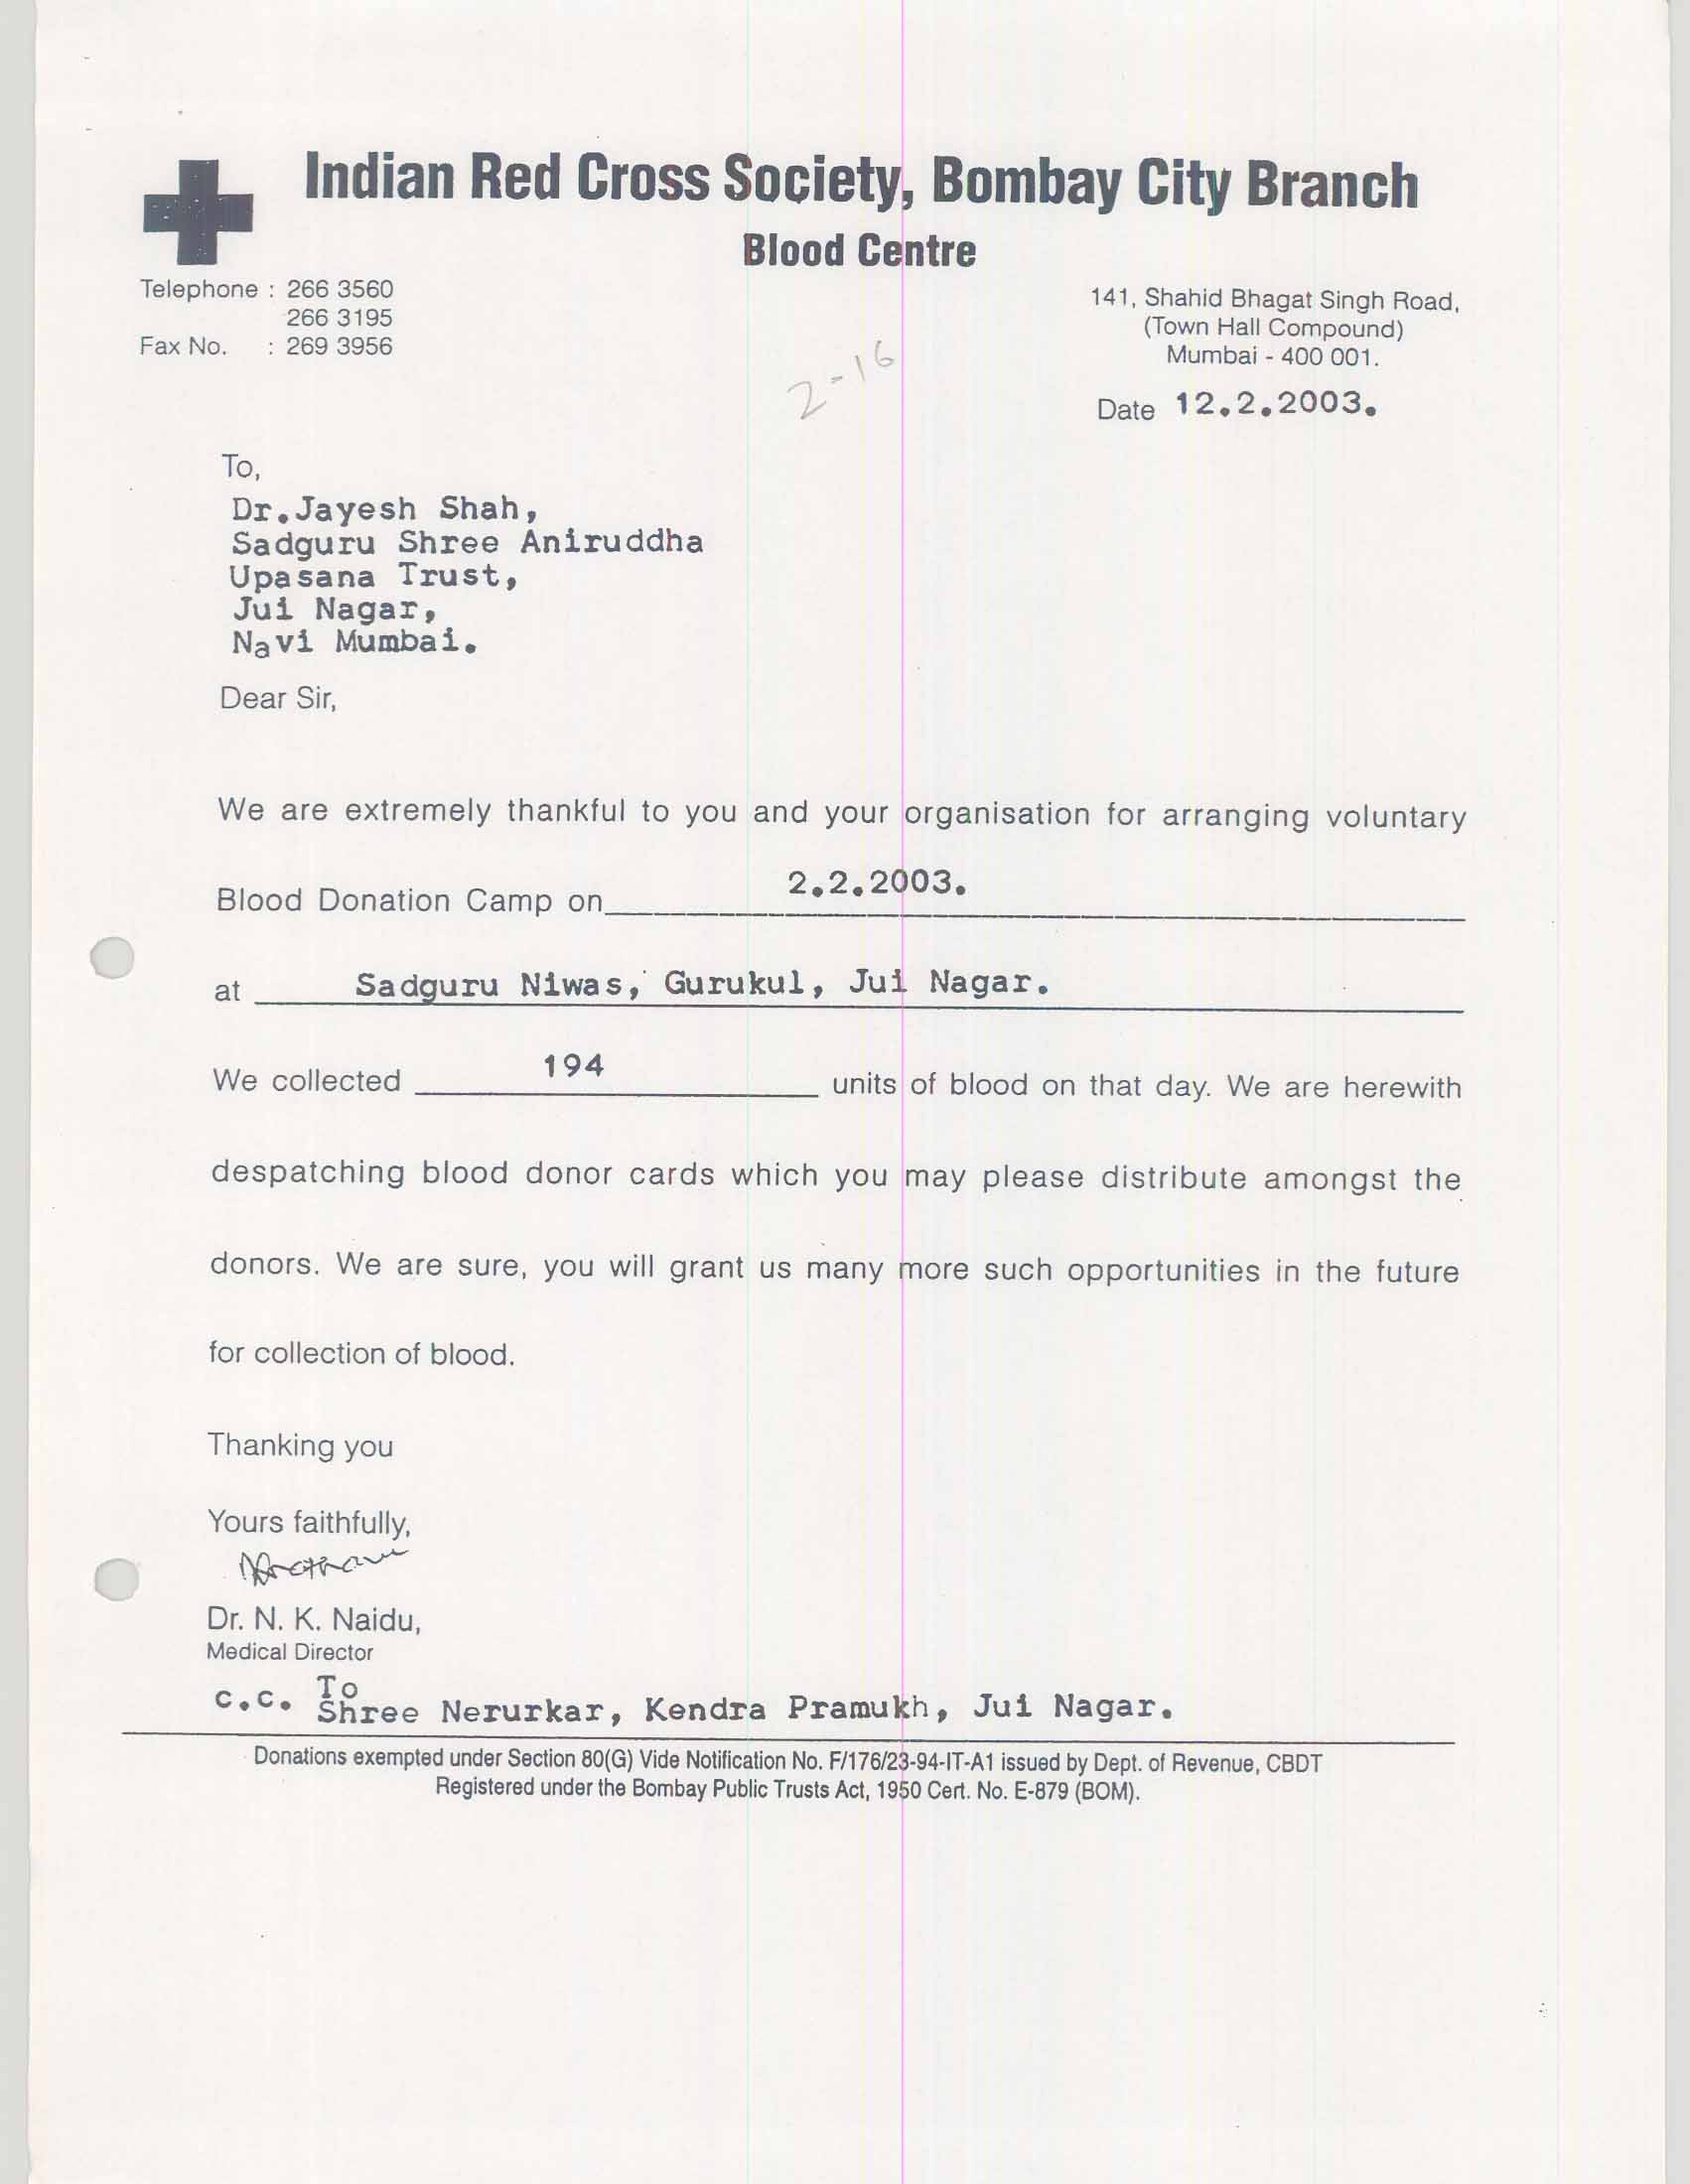 Appreciation-Letter from Indian Red Cross Soc 2003-for-Aniruddhafoundation-Compassion-Social-services